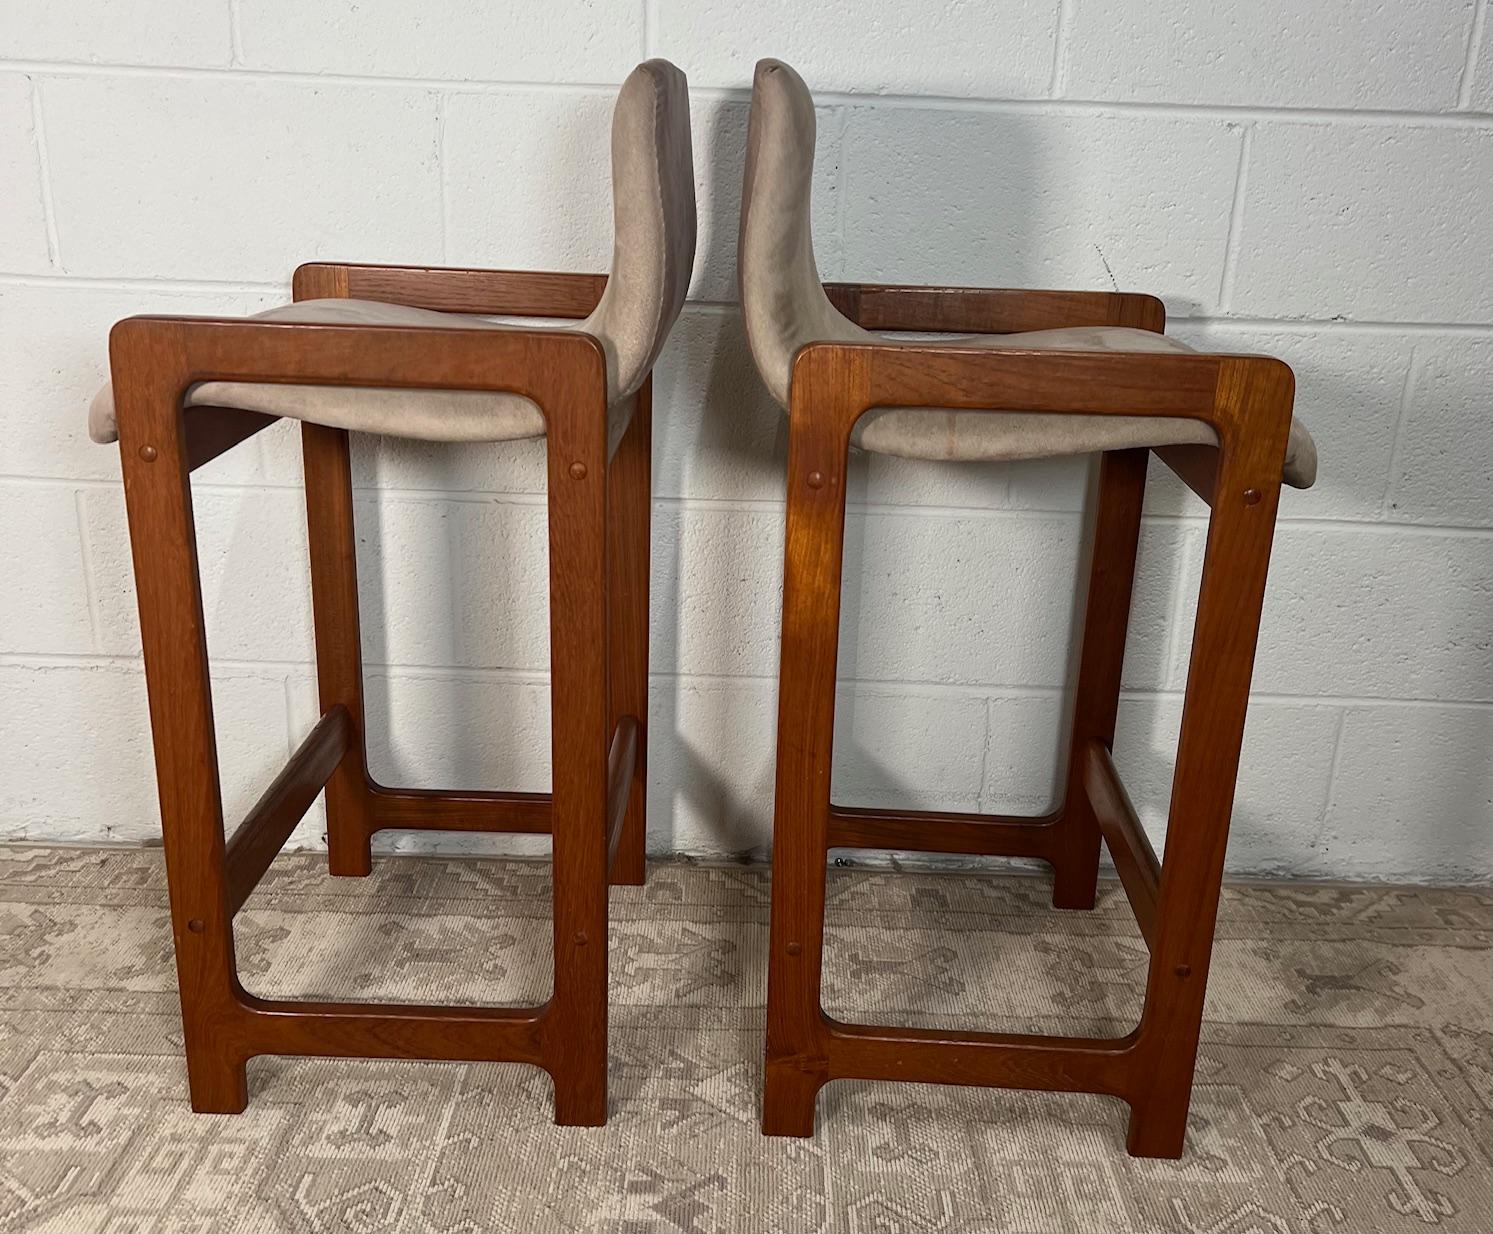 Pair of counter height bar stools by D-Scan. Original label underneath. Recently reupholstered by previous owner.

Dimensions:

18.25